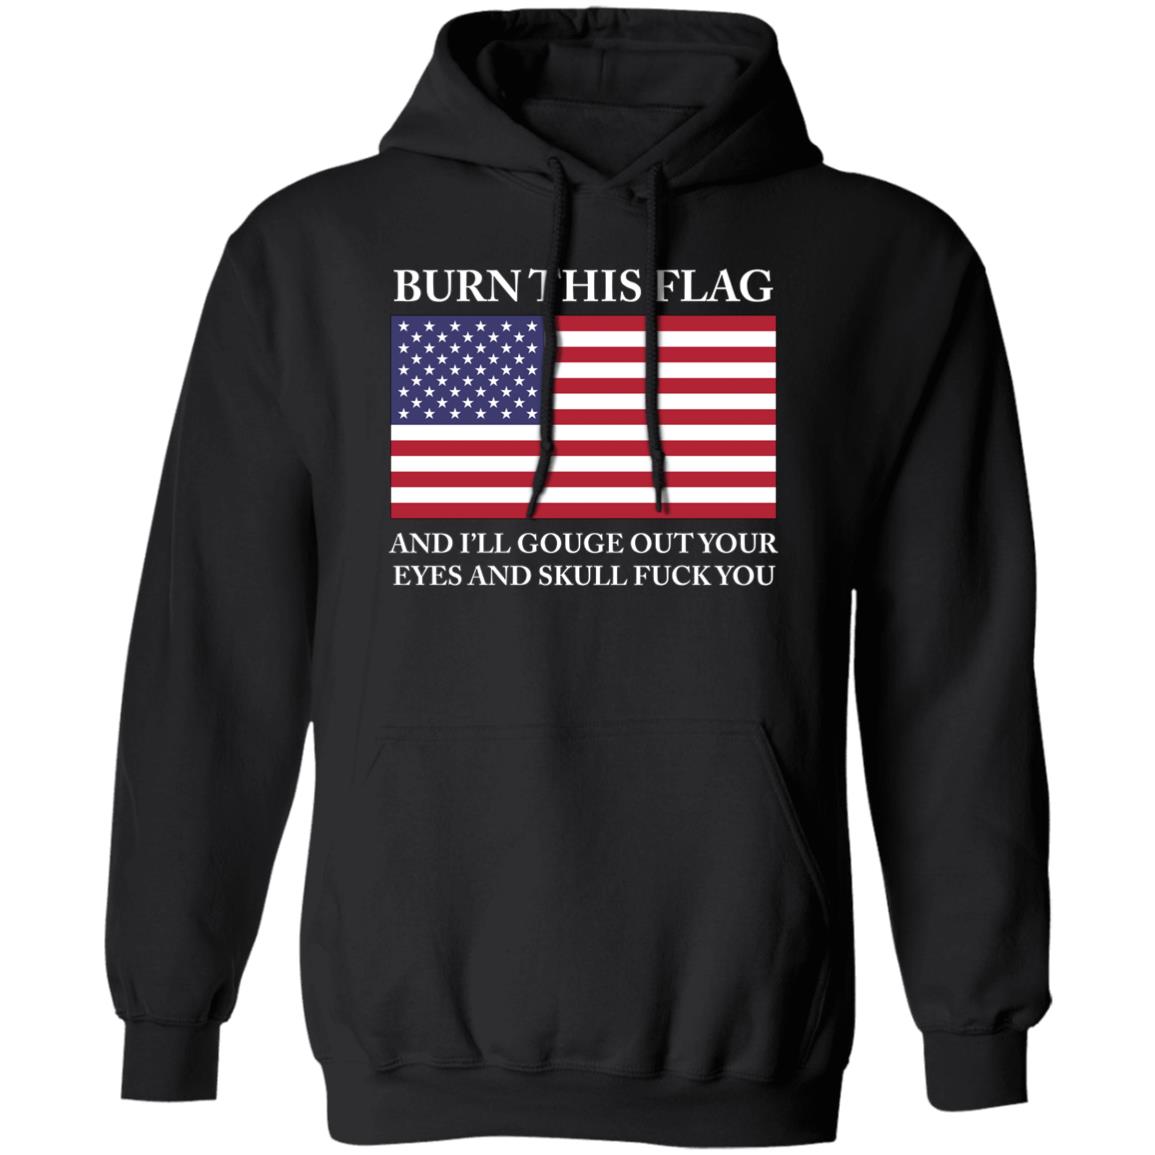 Burn This Flag And I’ll Gouge Out Your Eyes And Skull Fuck You Shirt 2